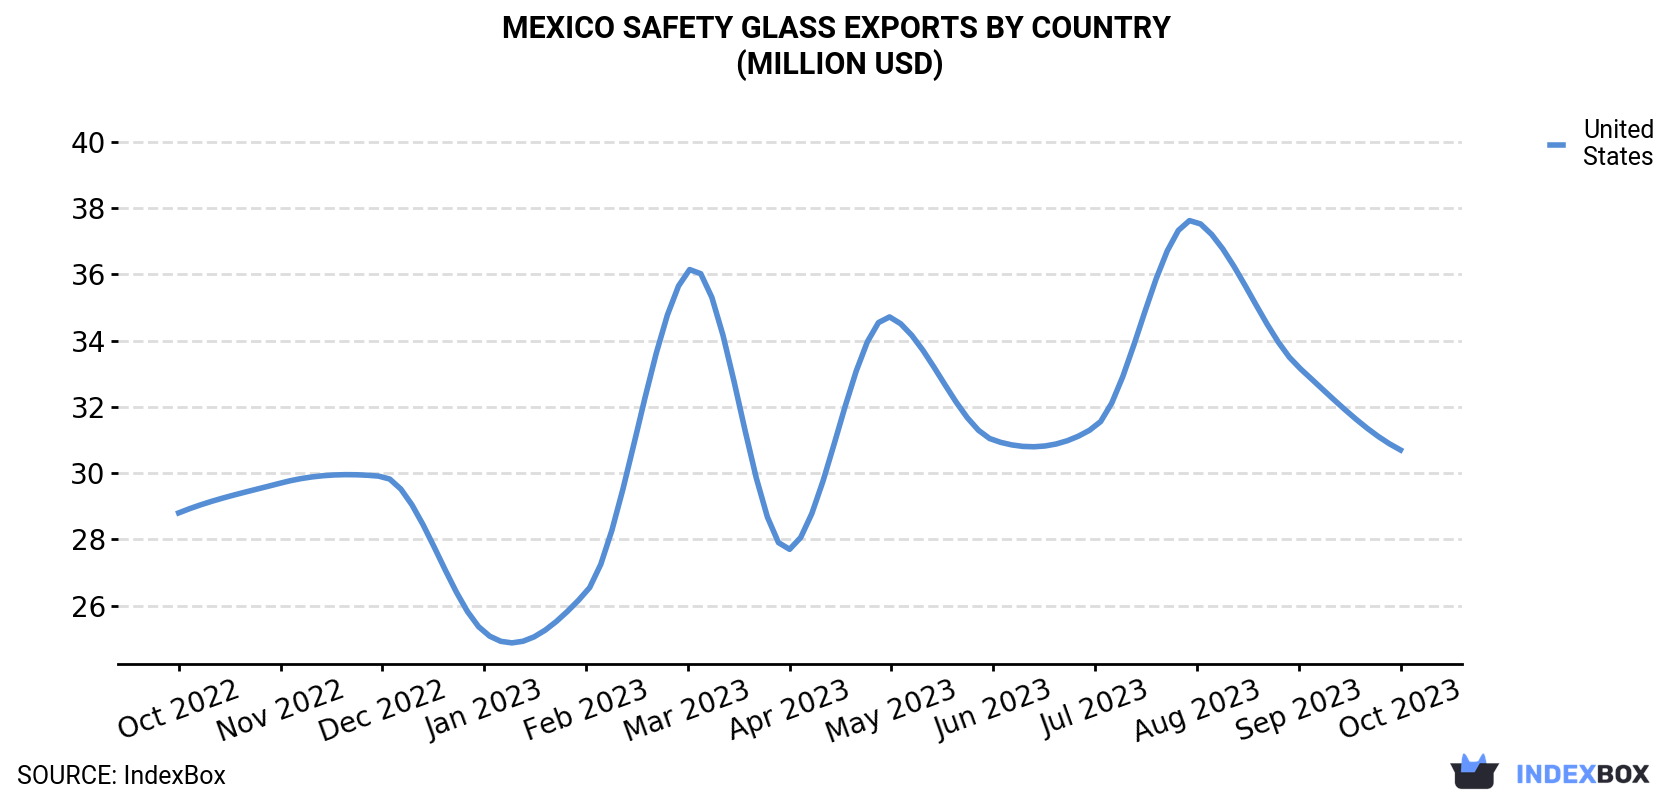 Mexico Safety Glass Exports By Country (Million USD)